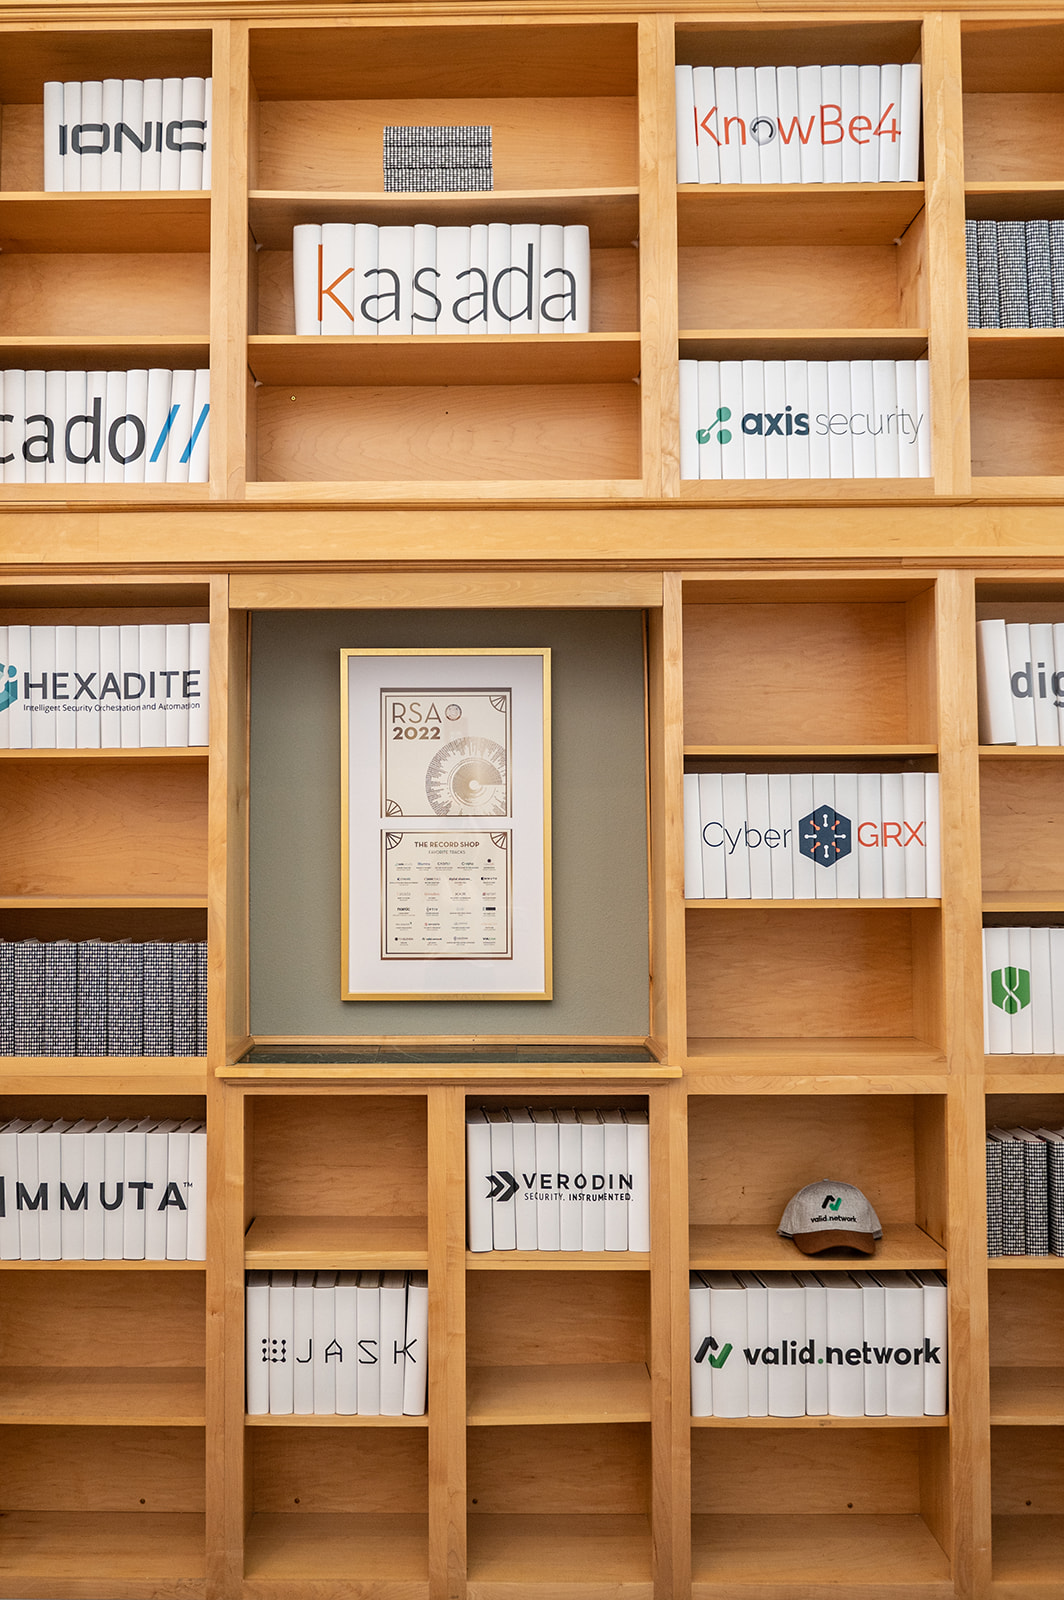 Library shelves with security company logos printed on the book spines